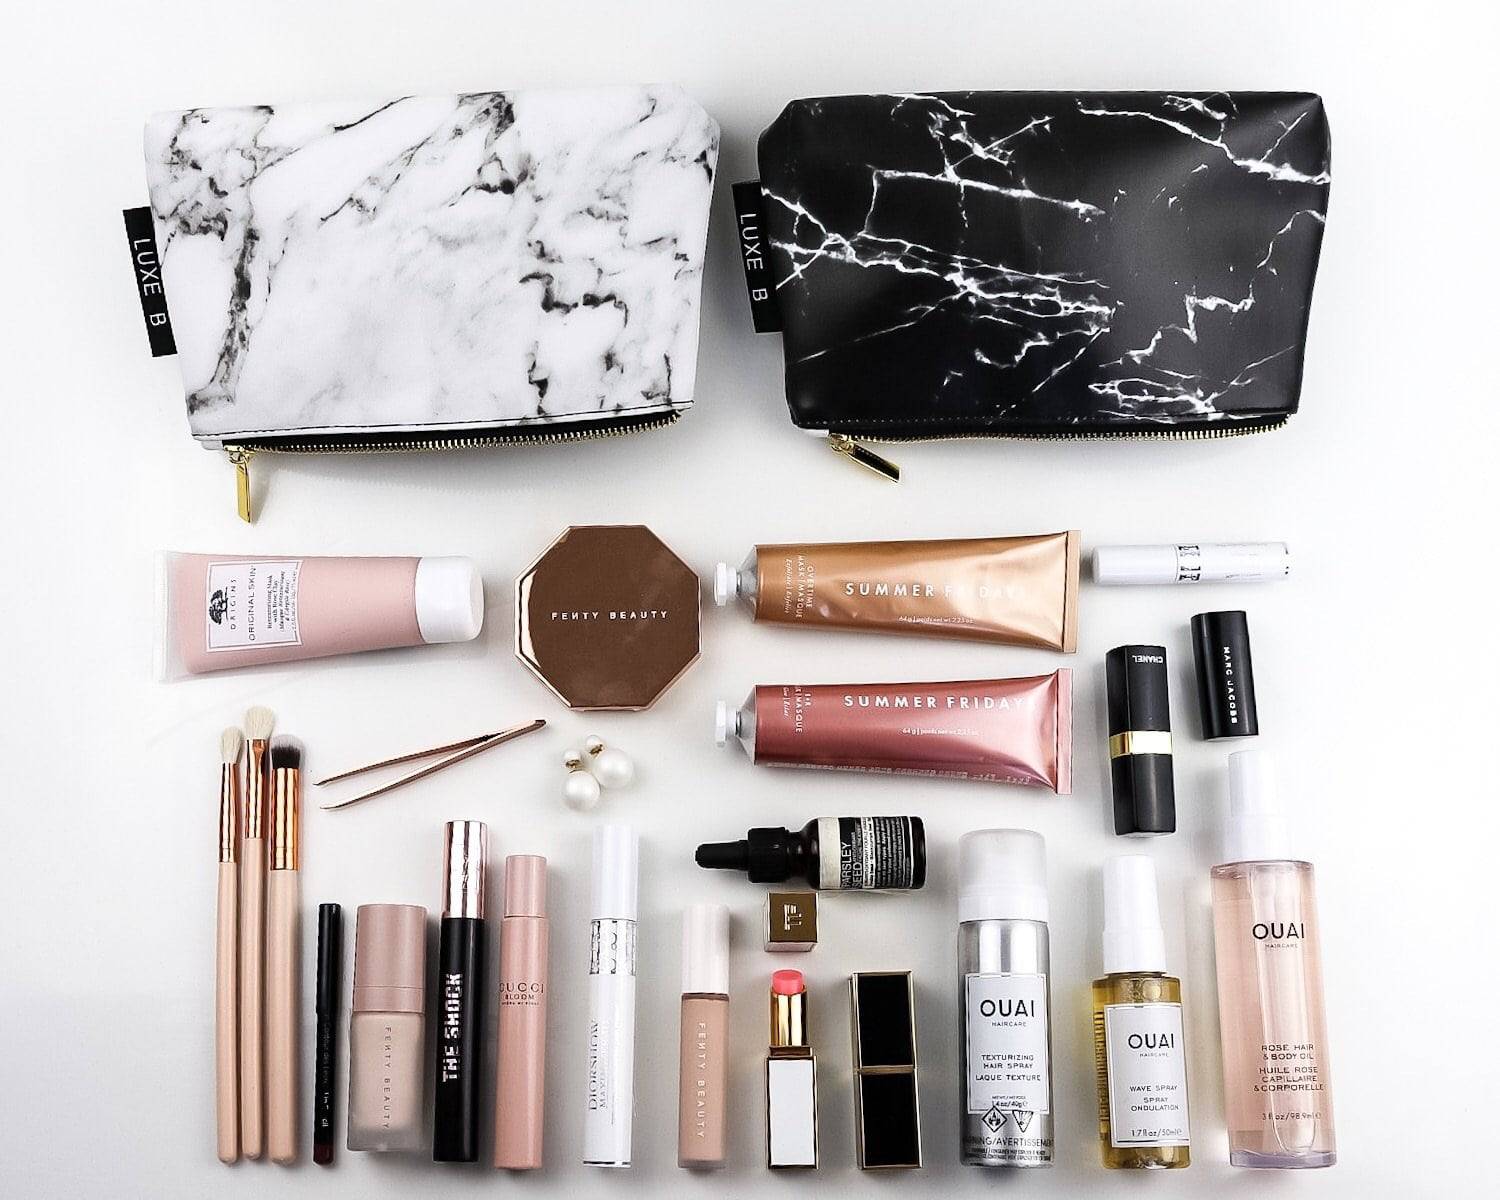 LUXE B Marble Cosmetic Makeup Bag- Smaller size to fit in your purse - Luxe B Pampas Grass  Canada , ships via Canada Post from Edmonton 